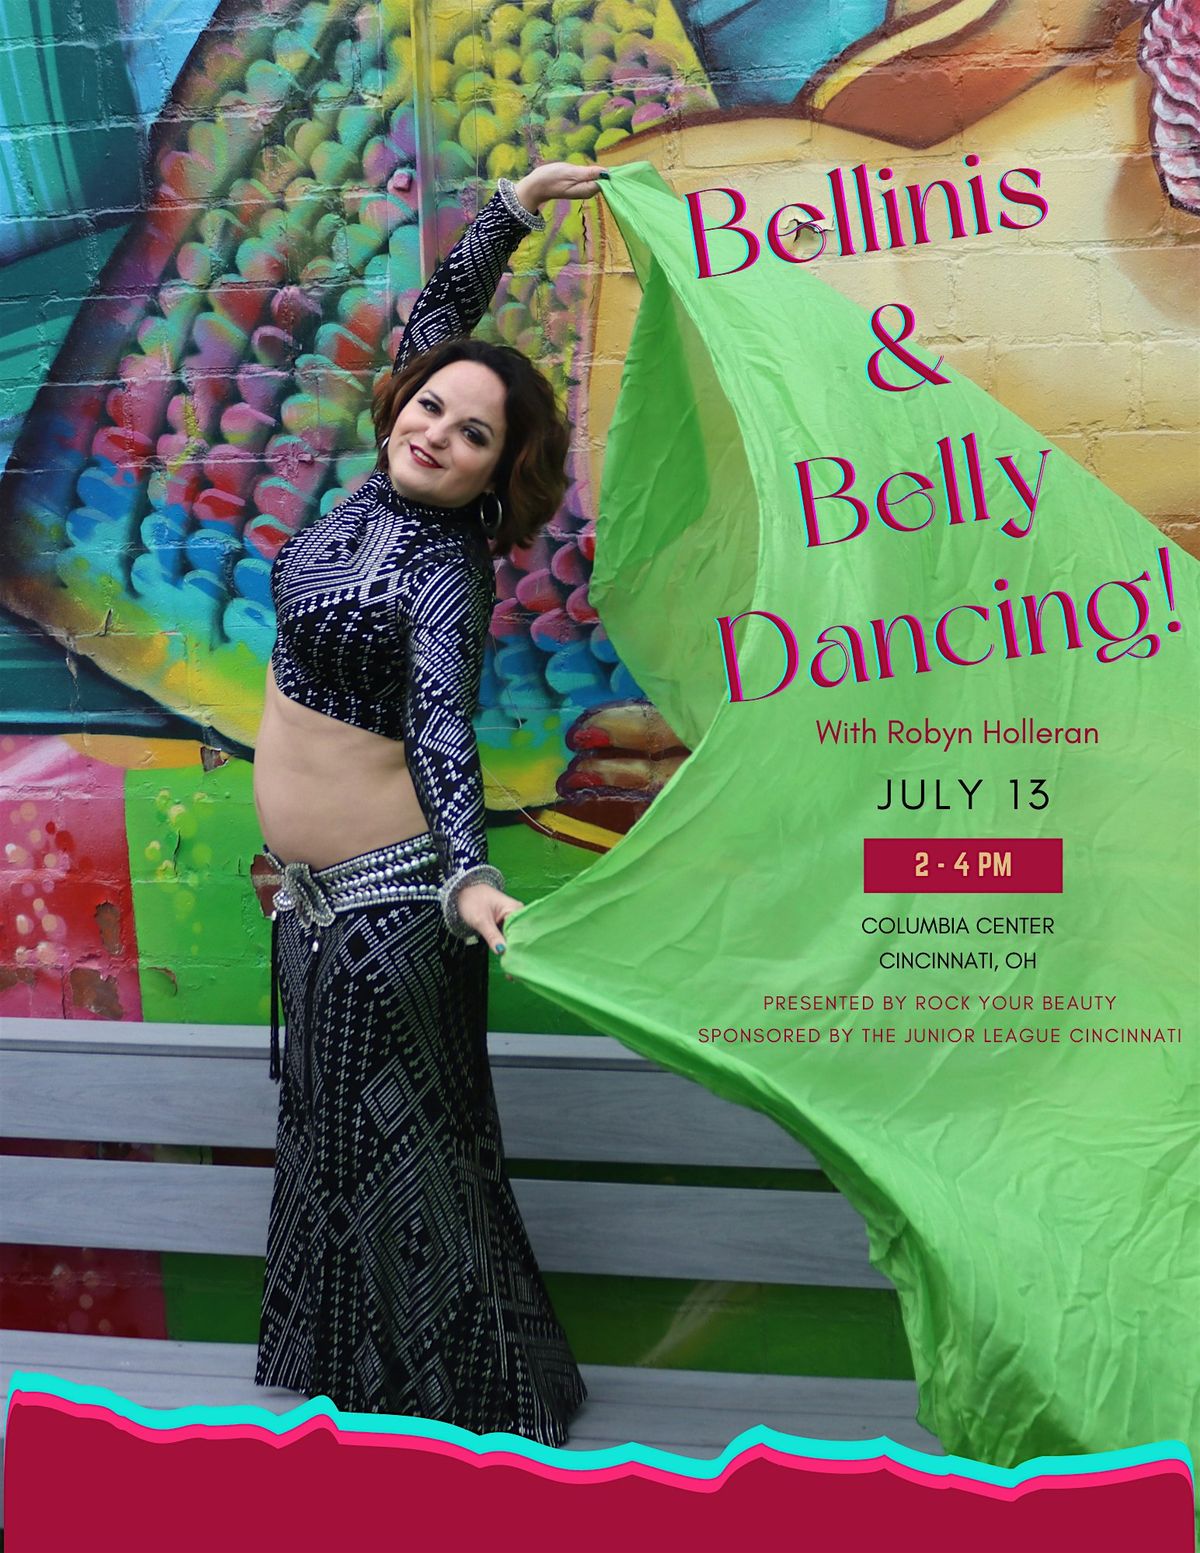 Bellinis and Belly Dancing, presented by Rock Your Beauty